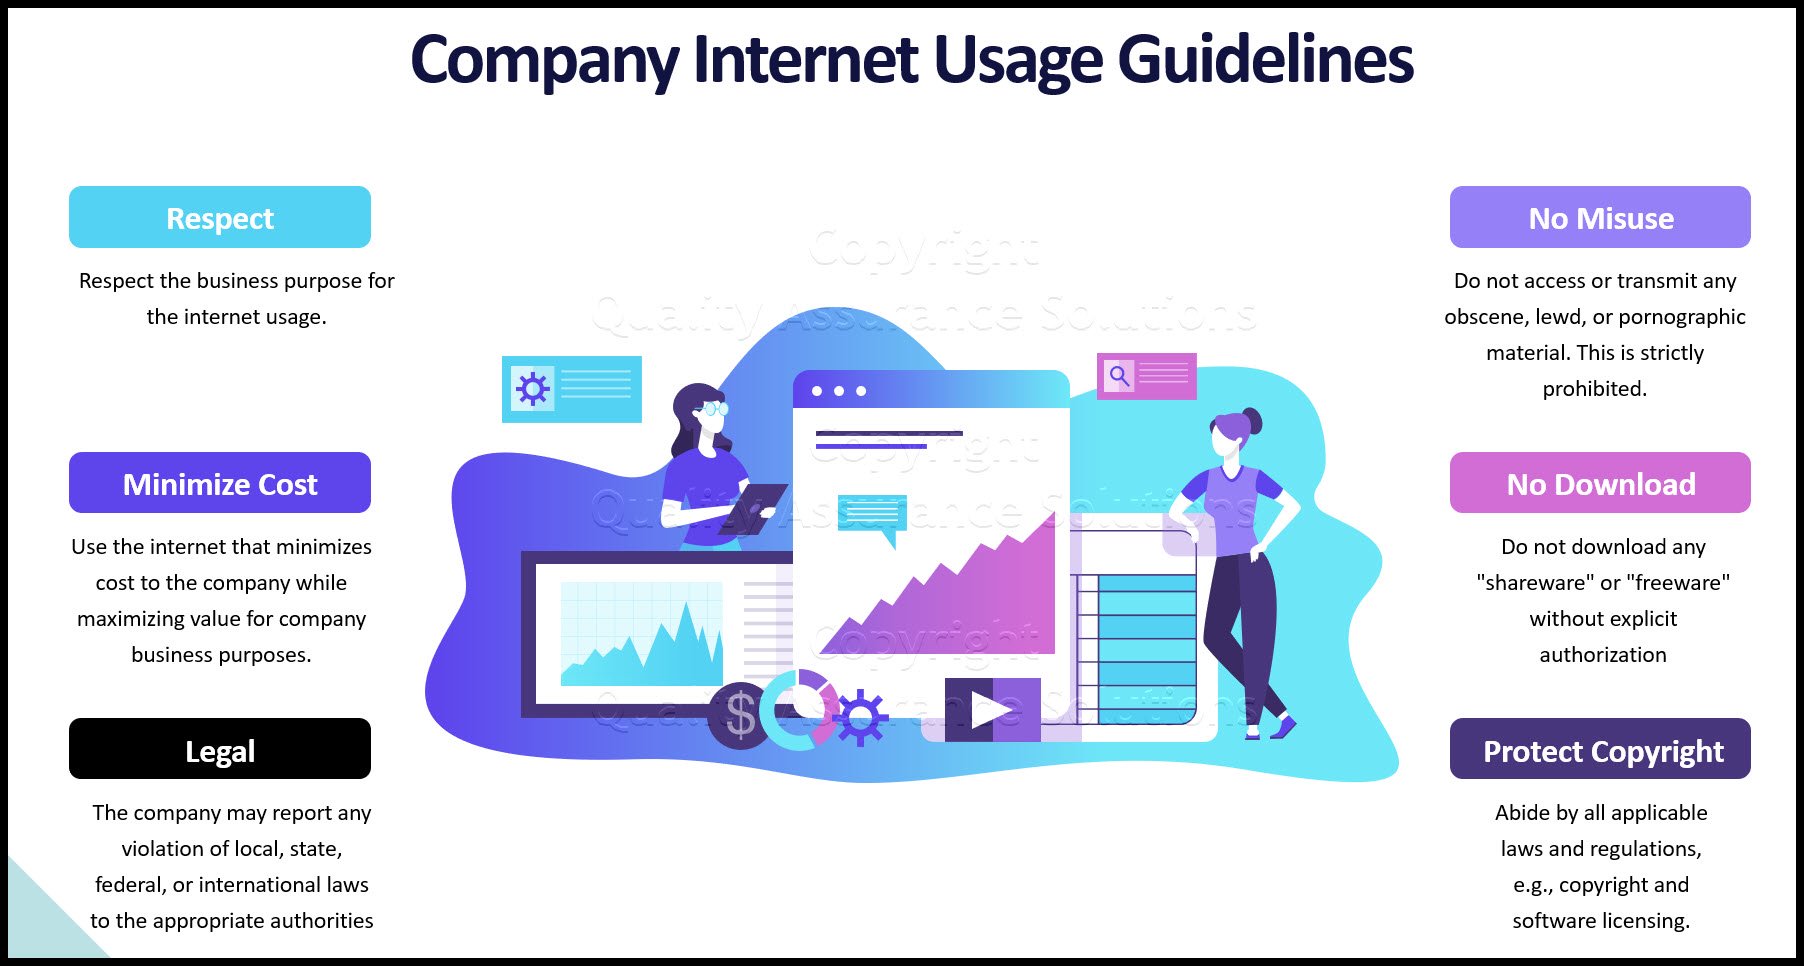 This corporate internet policy covers criteria, personal use, violations, best practices and more. Download it for free and use it for your business!